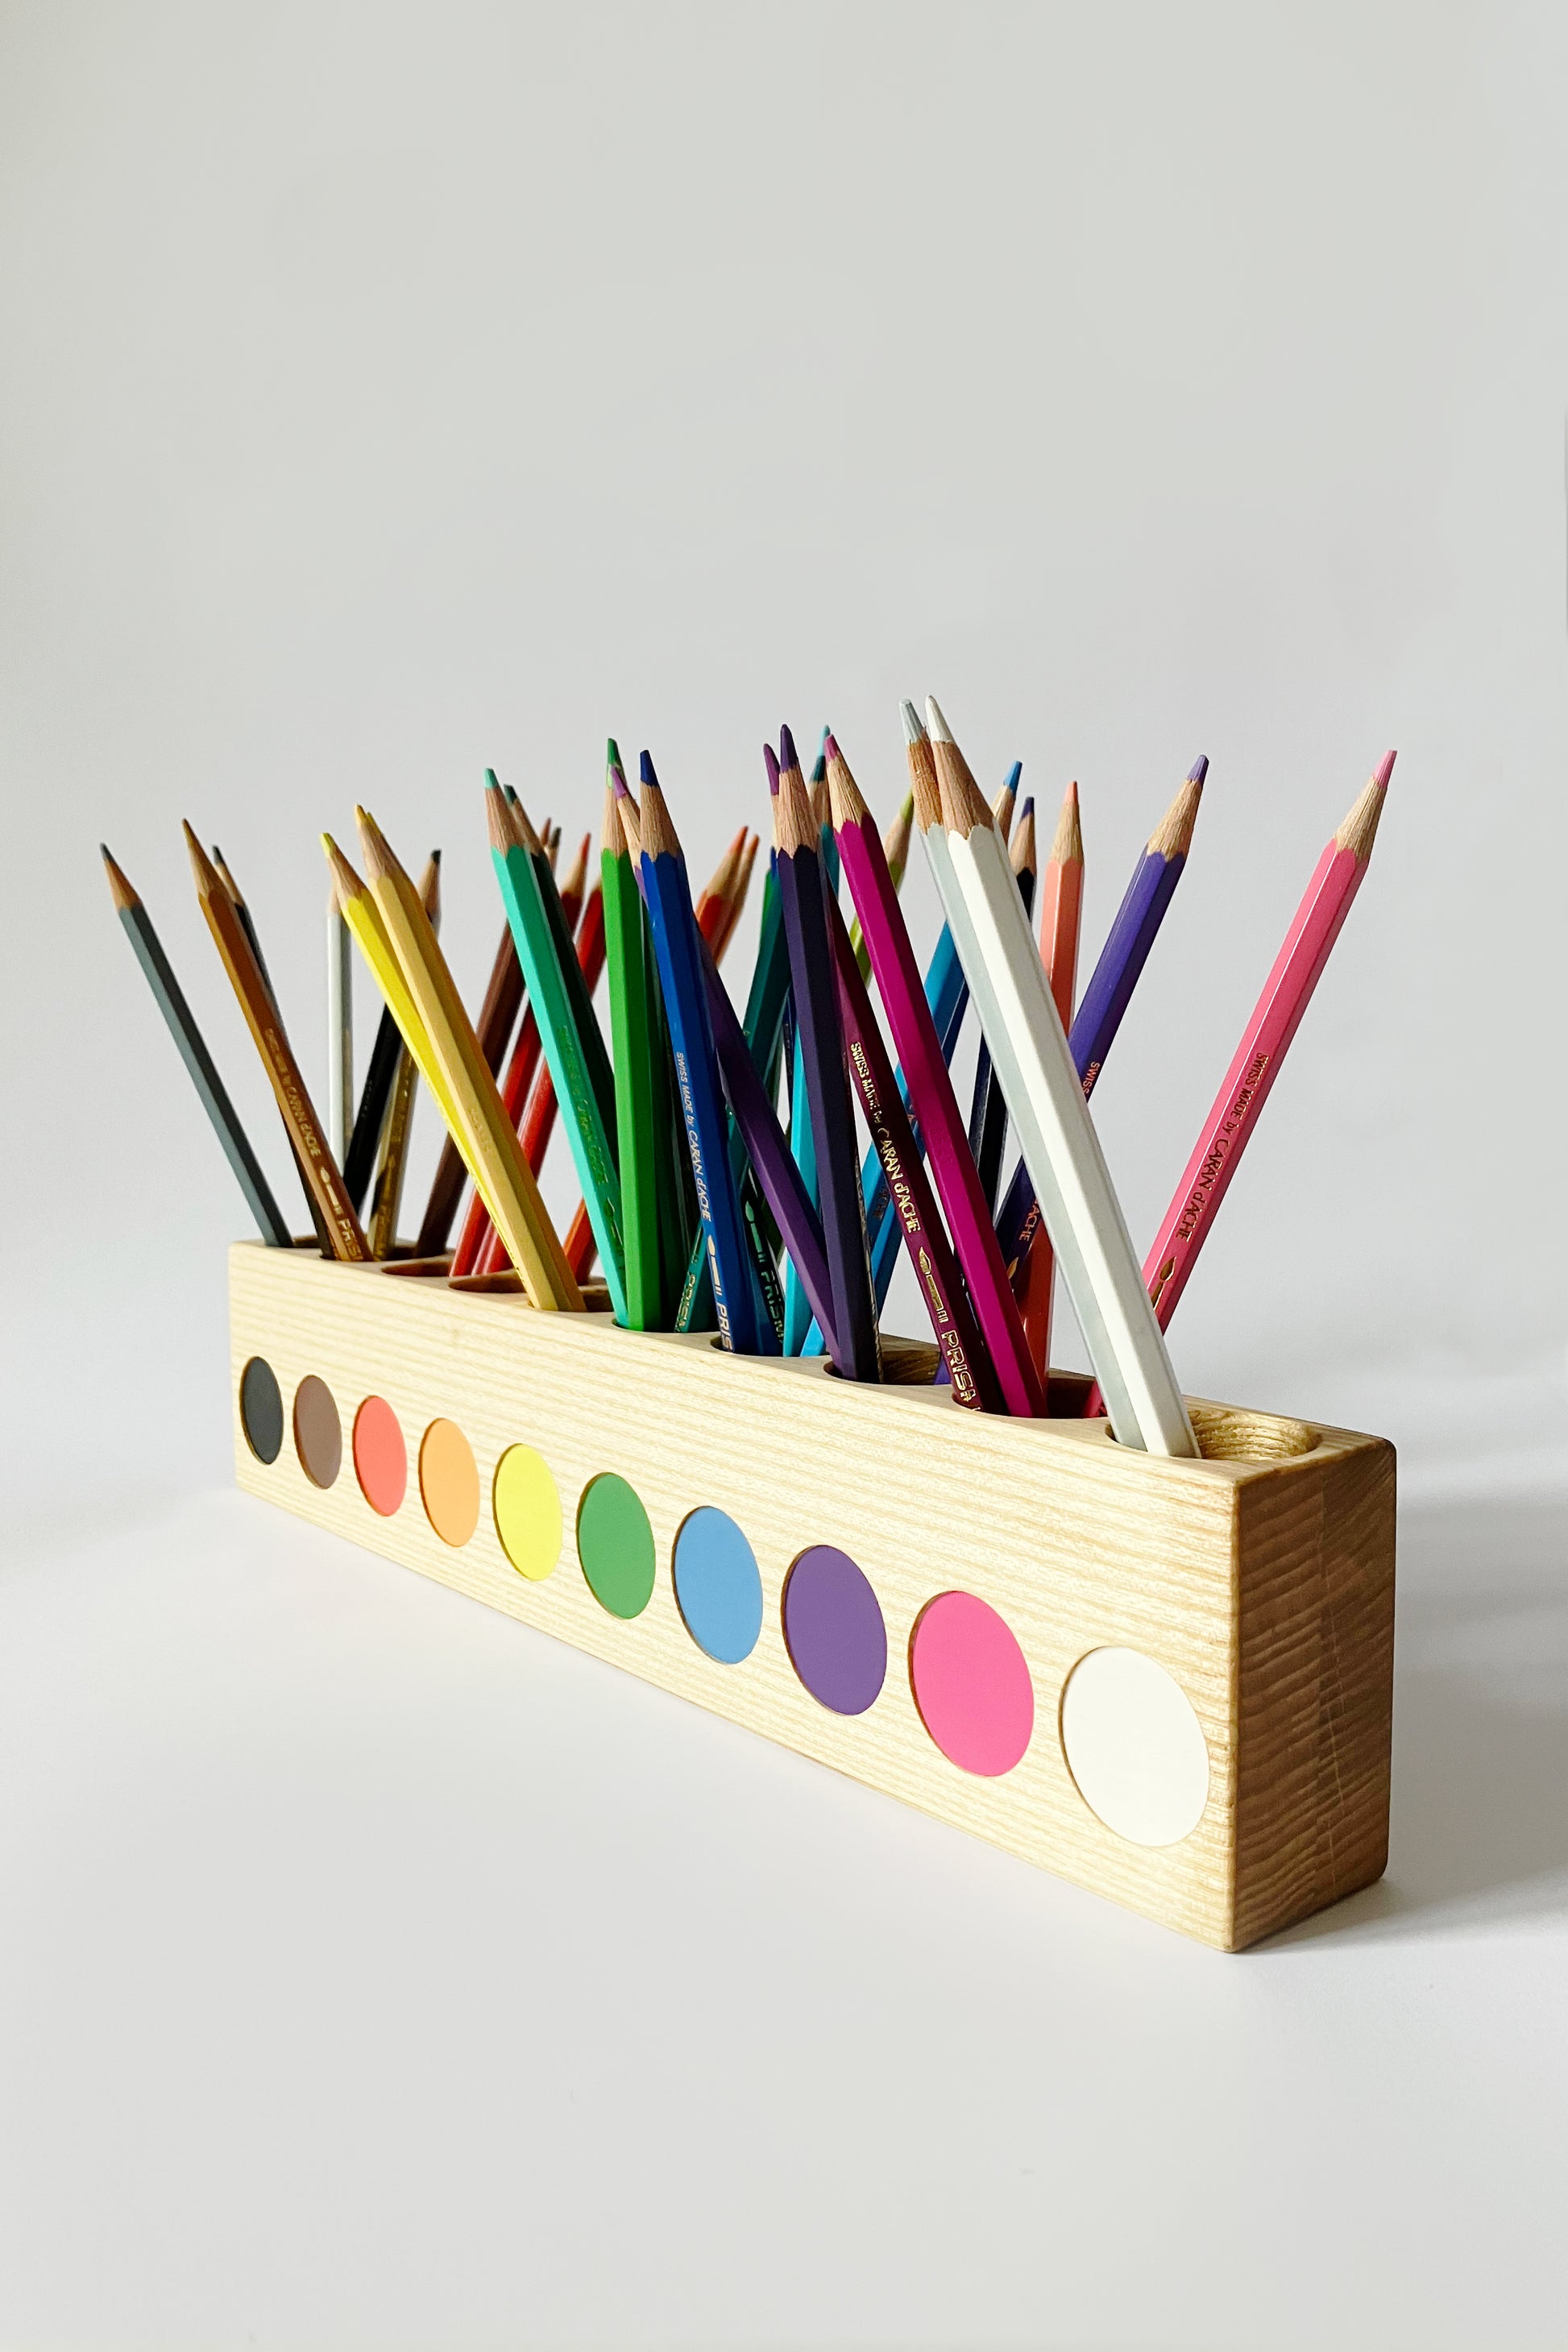 Montessori pencil holder, view from right side at an angle, white background